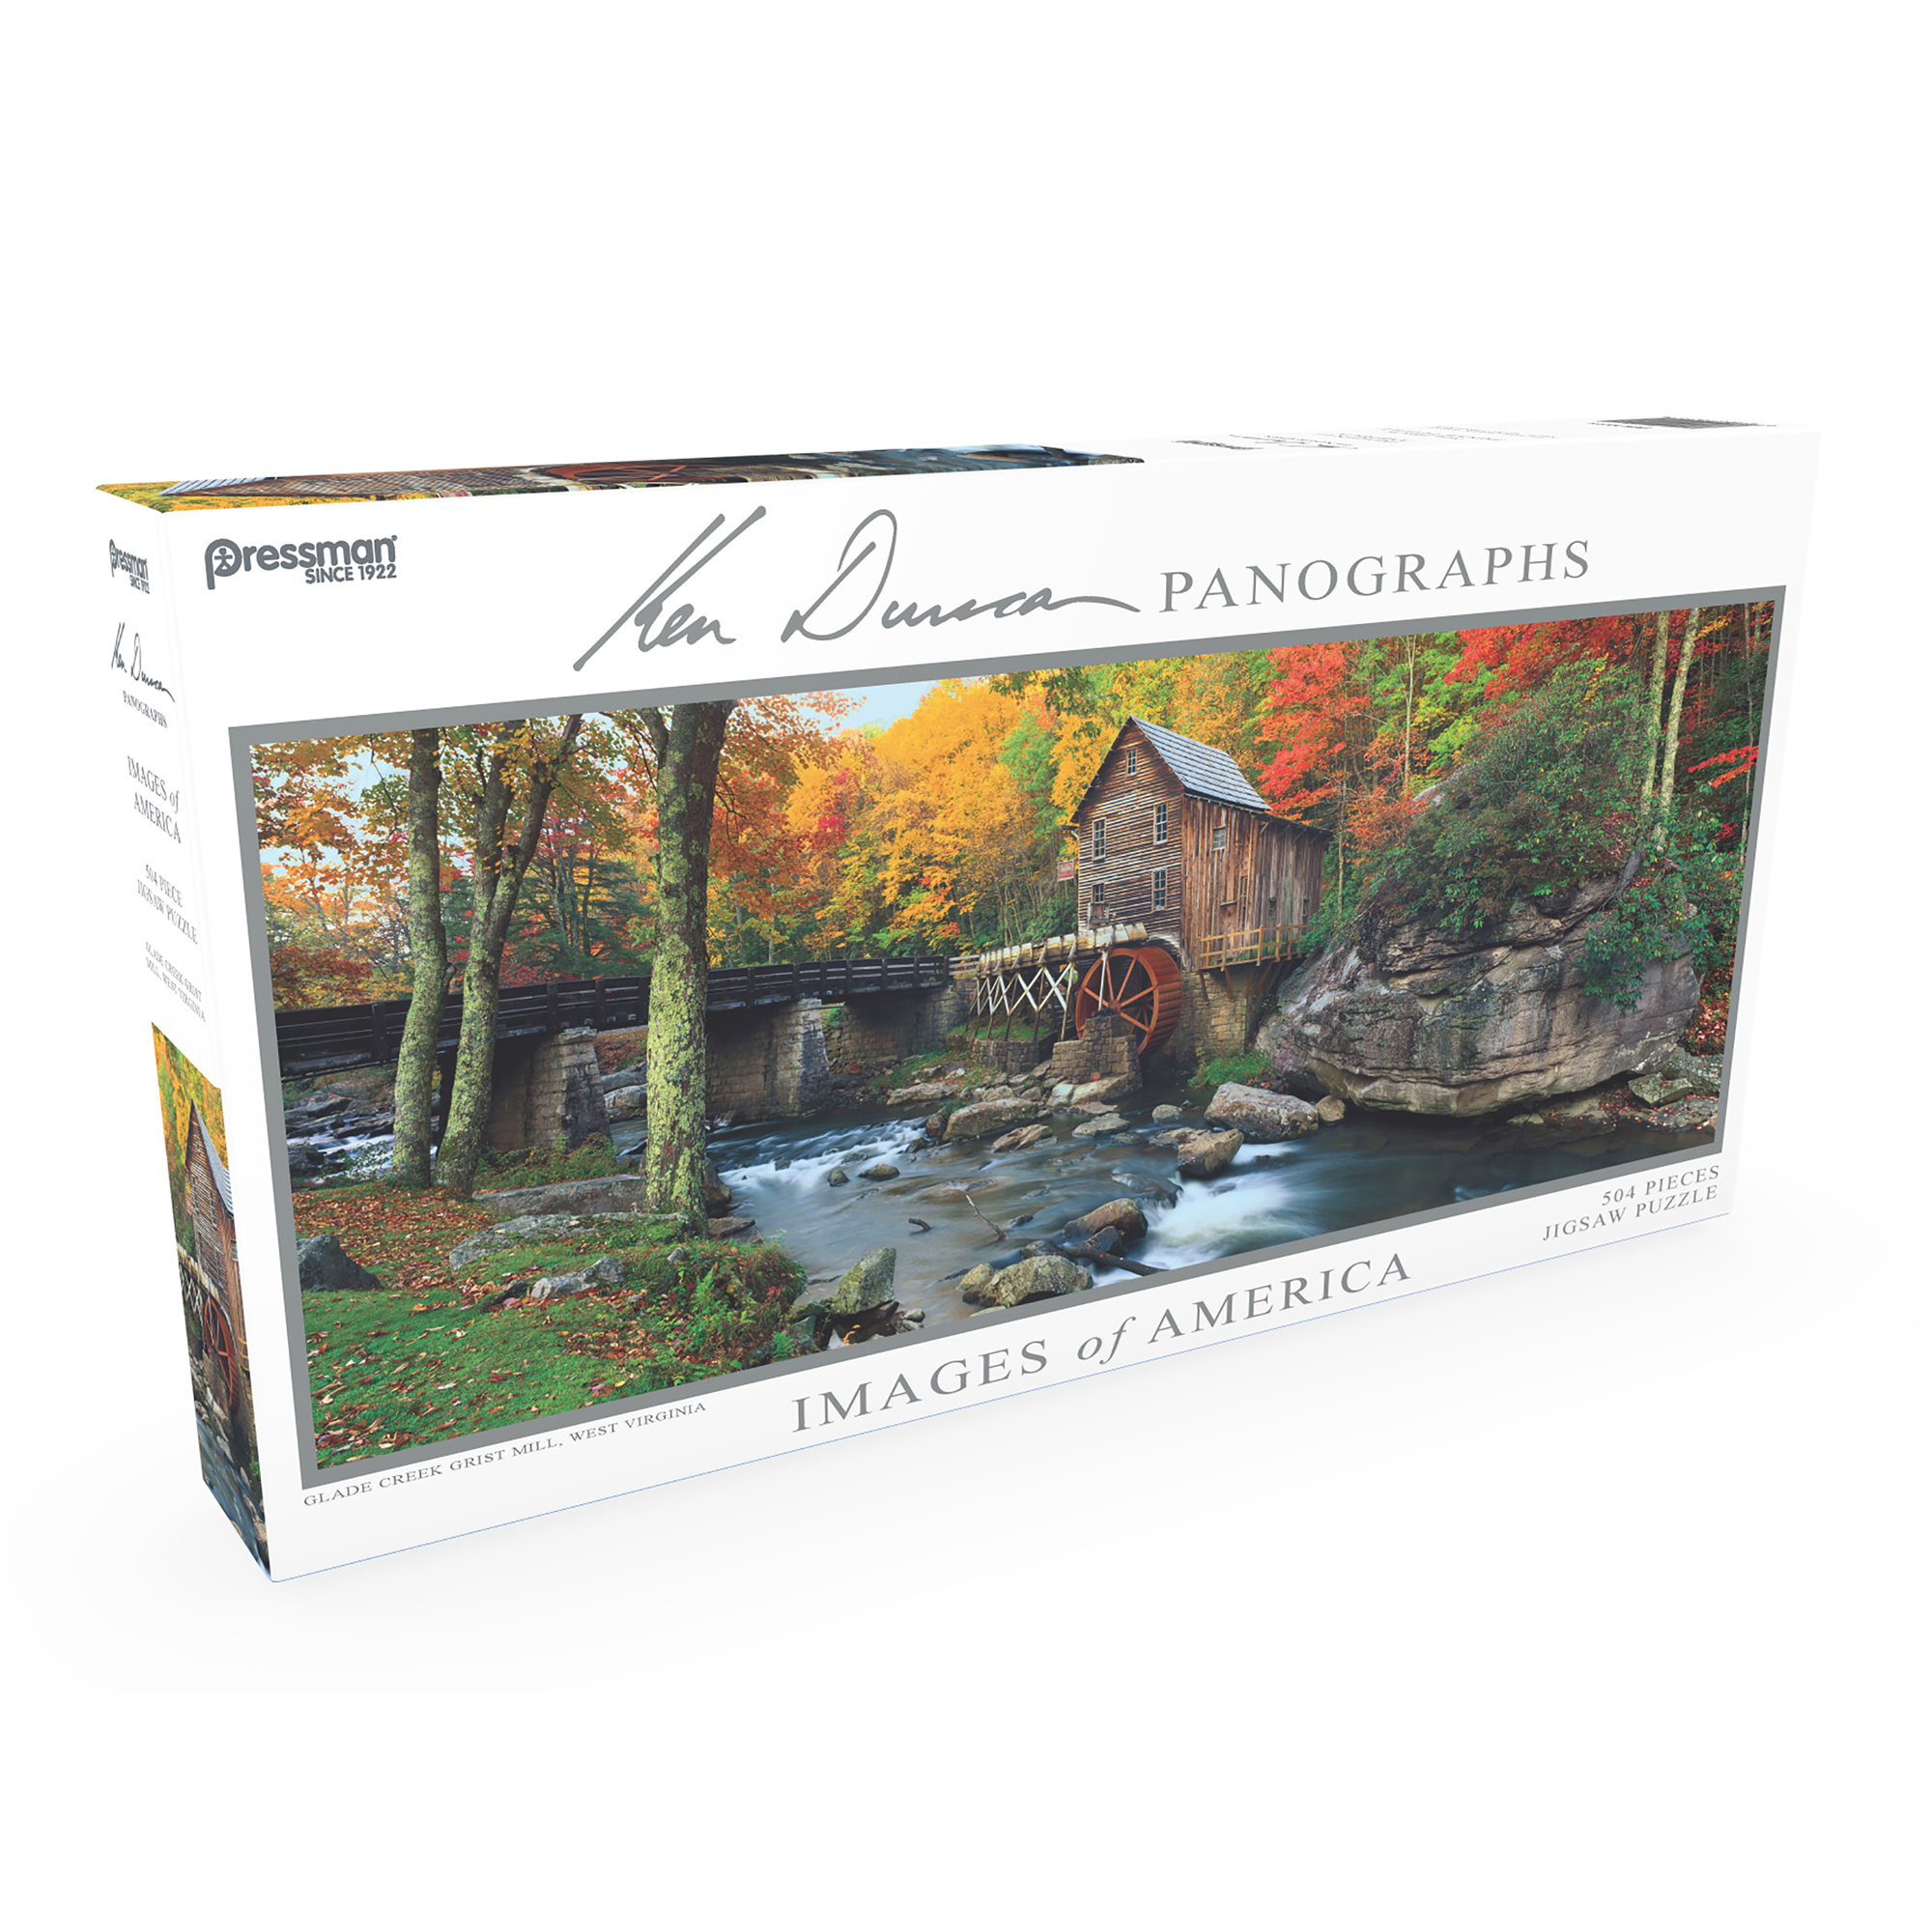 Pressman Toy Images of America 504 Piece Panoramic Puzzle, Glade Creek Grist Mill